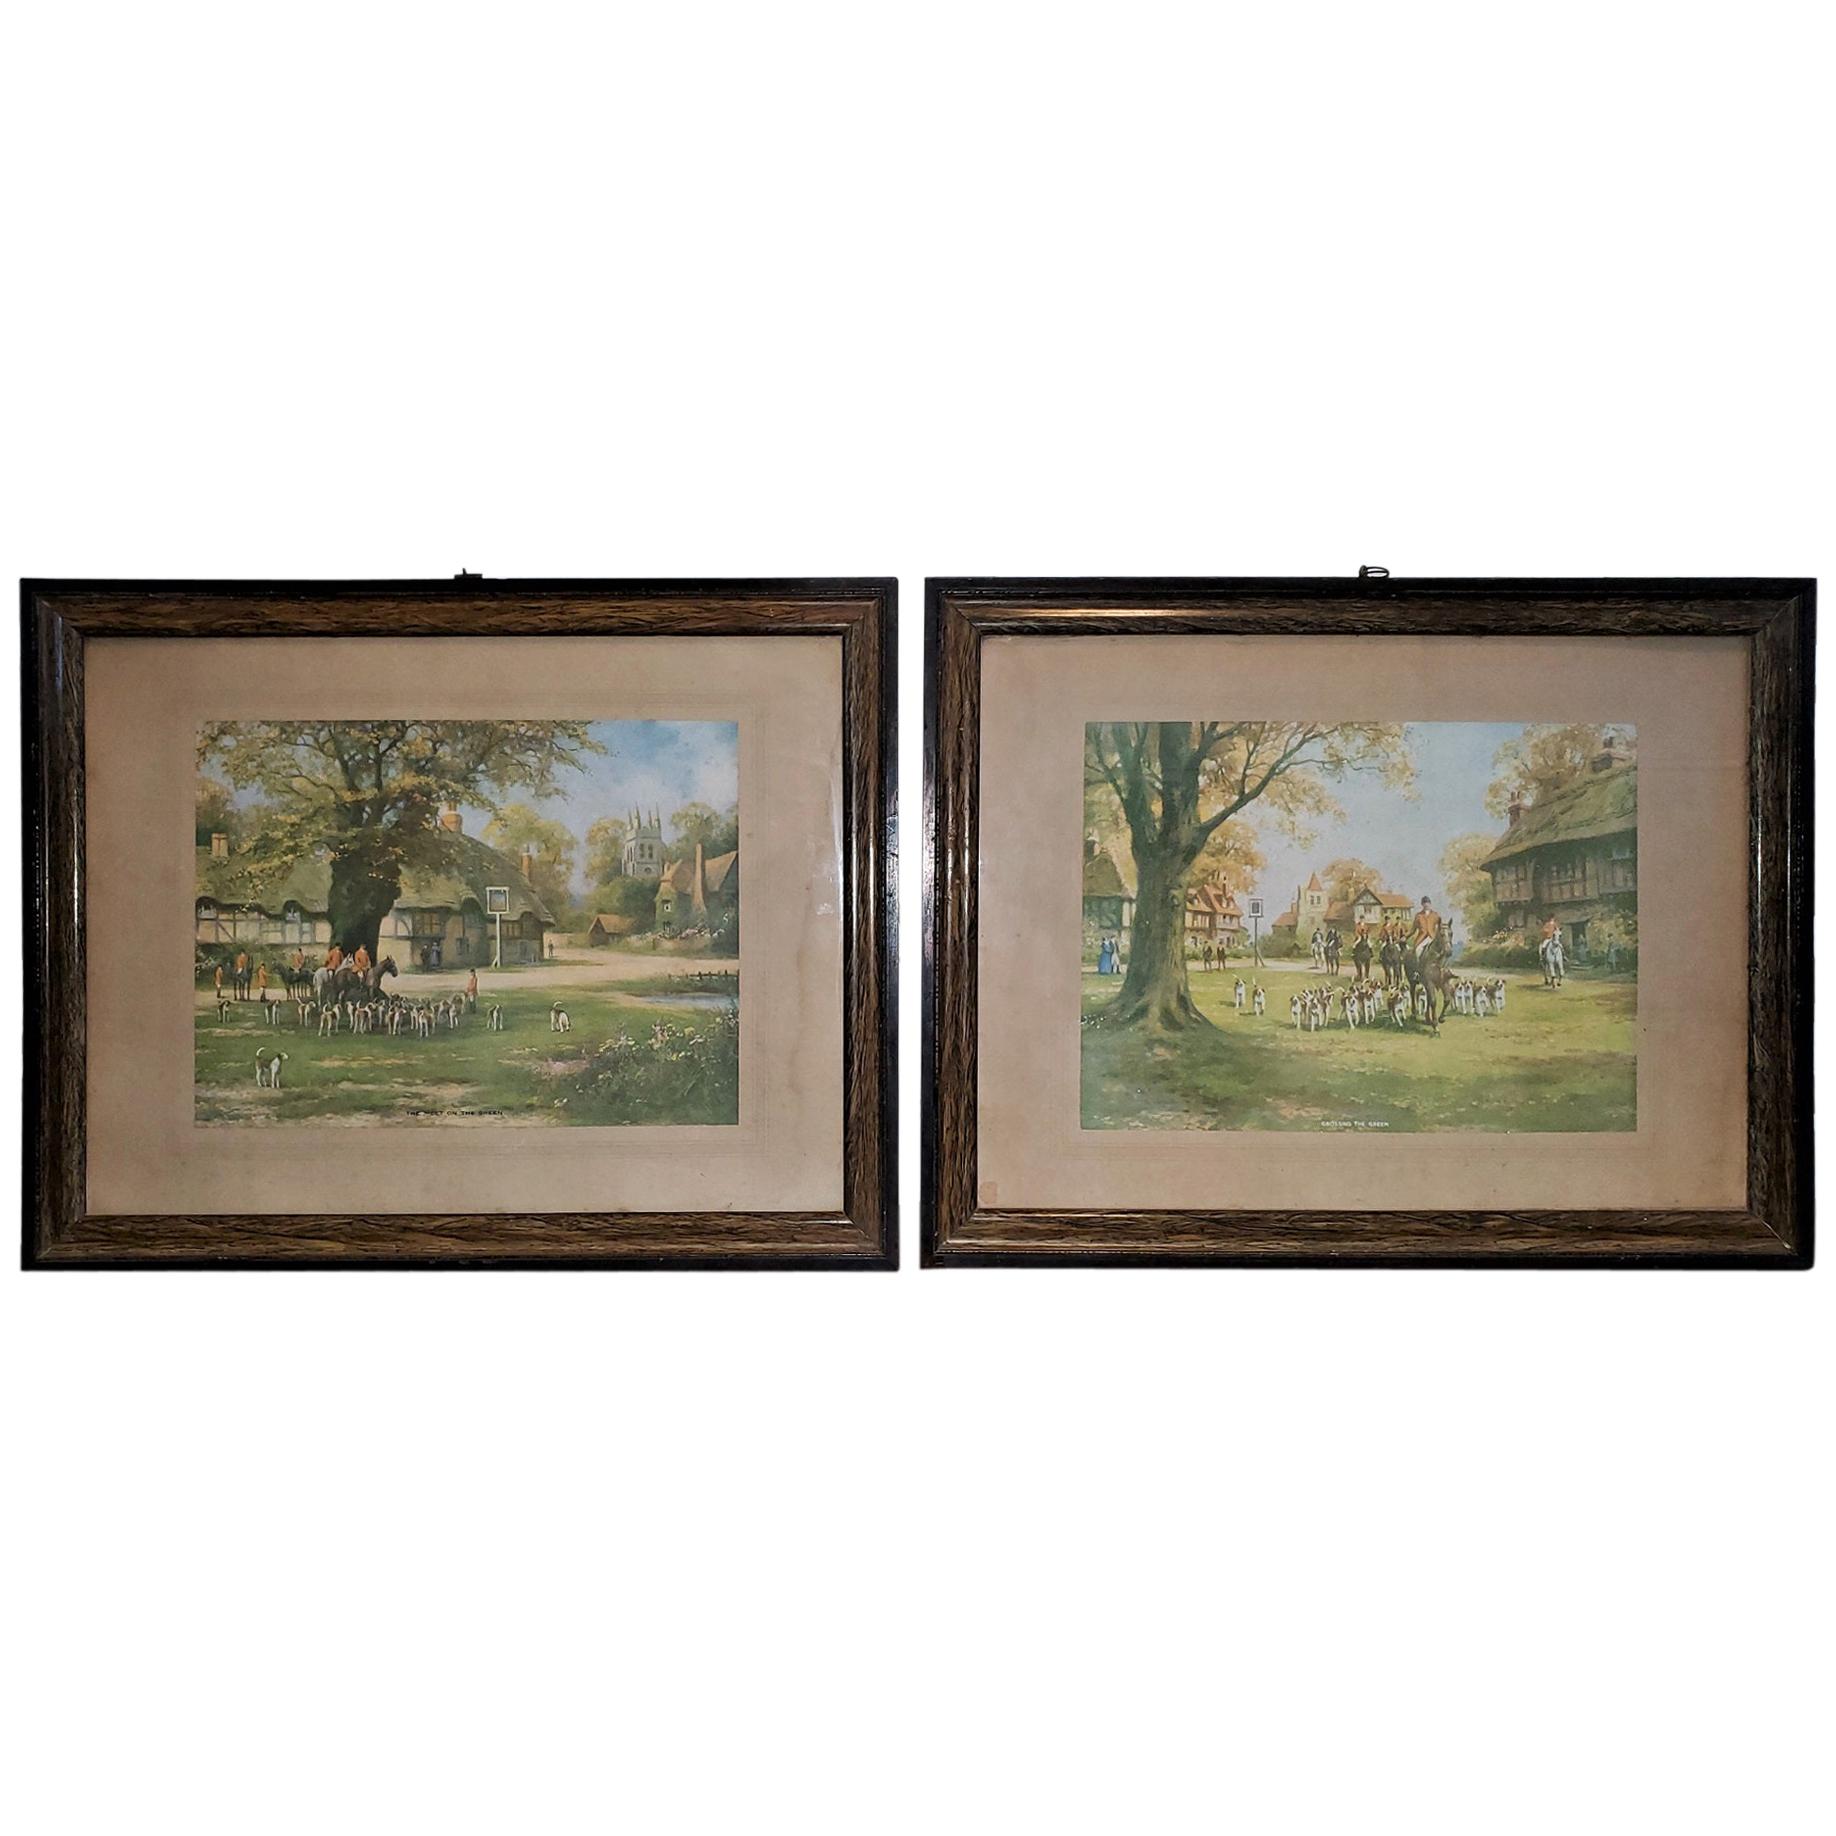 Pair of British Hunt Prints of The Meet on the Green and Crossing the Green